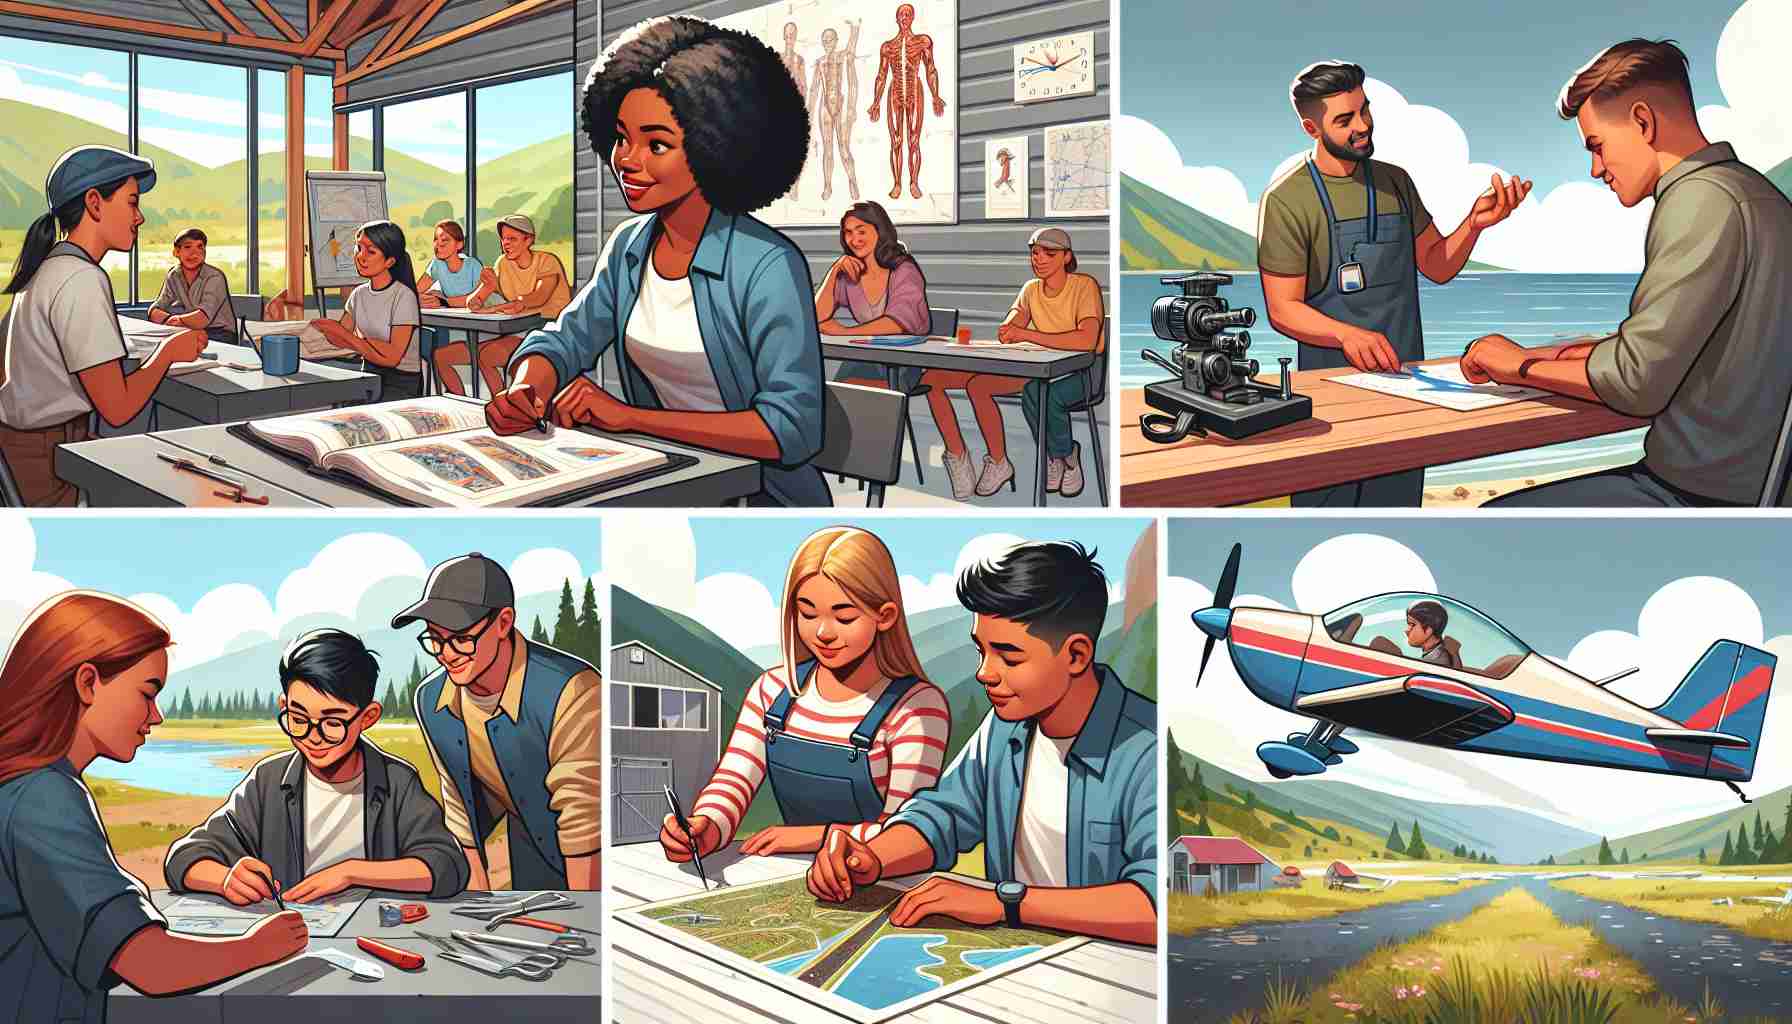 An engaging high-definition image showcasing outdoor adventures at an aviation camp. The scene features a group of people engaging in various activities related to aviation. There is an African American woman instructing a seminar on aerodynamics to a diverse group of camp participants. In another part of the camp, an Asian man is helping a Hispanic boy to assemble a model airplane. Meanwhile, a Caucasian woman is seen checking detailed maps for flying routes, and a Middle Eastern man is taking flight in a small propeller-driven plane.